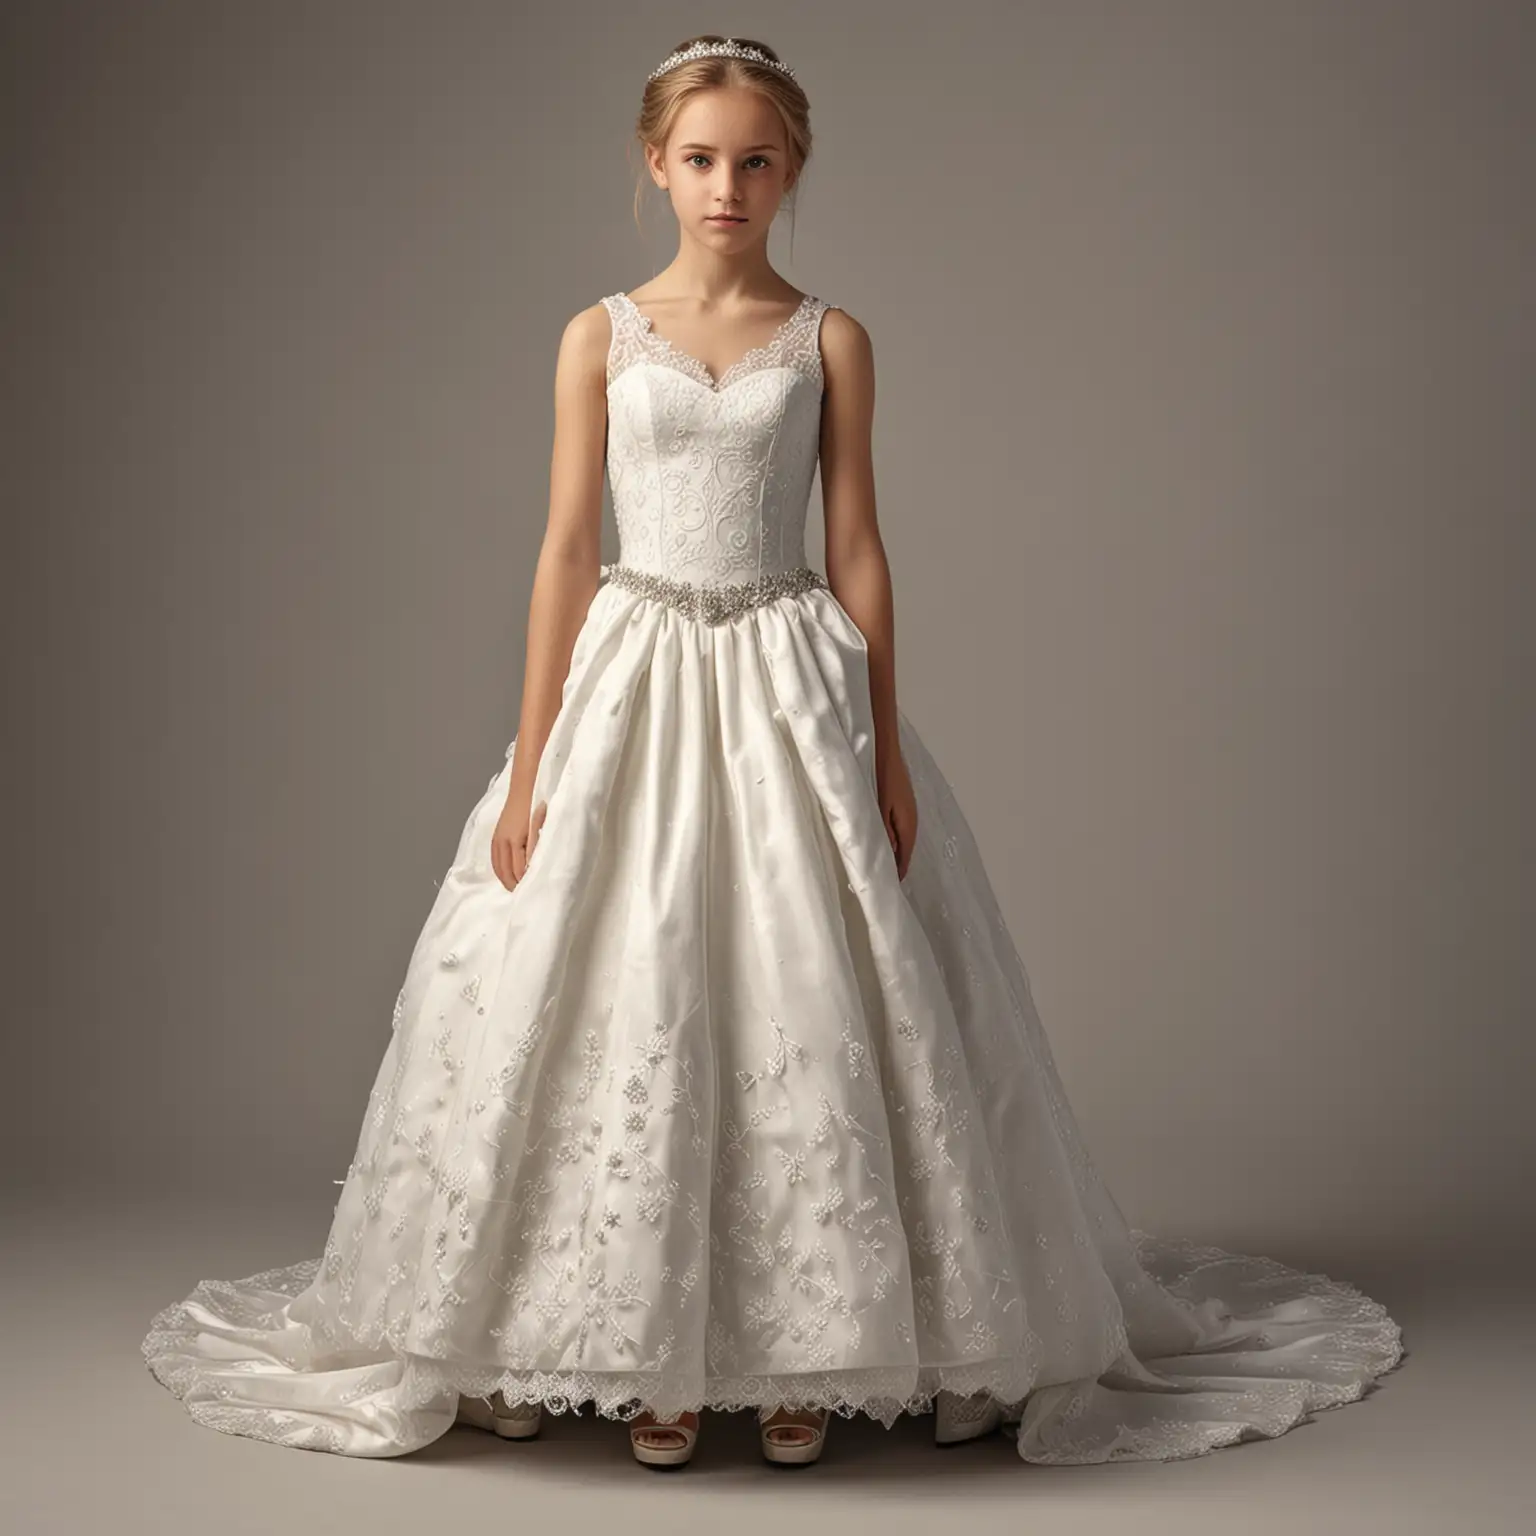 Hyperrealistic-Image-of-a-Pretty-14YearOld-Girl-in-Wedding-Dress-with-Elegant-Shoes